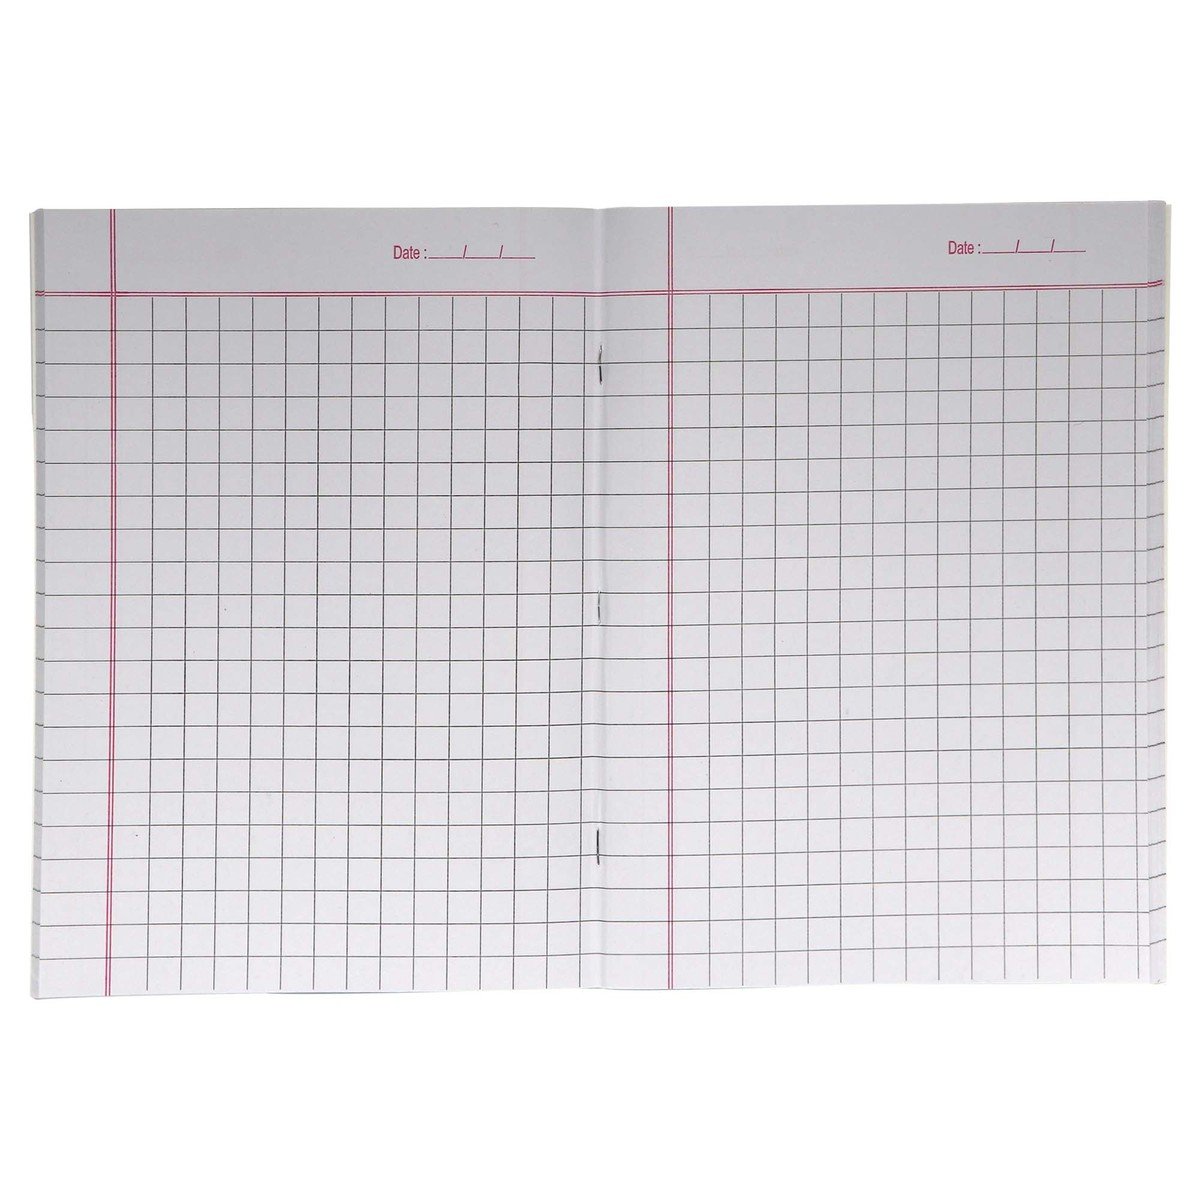  20 mm Square Notebook: Maths Exercise Book 20mm Squares A4, Back to School Notebooks A4 with Large Squares for Kids